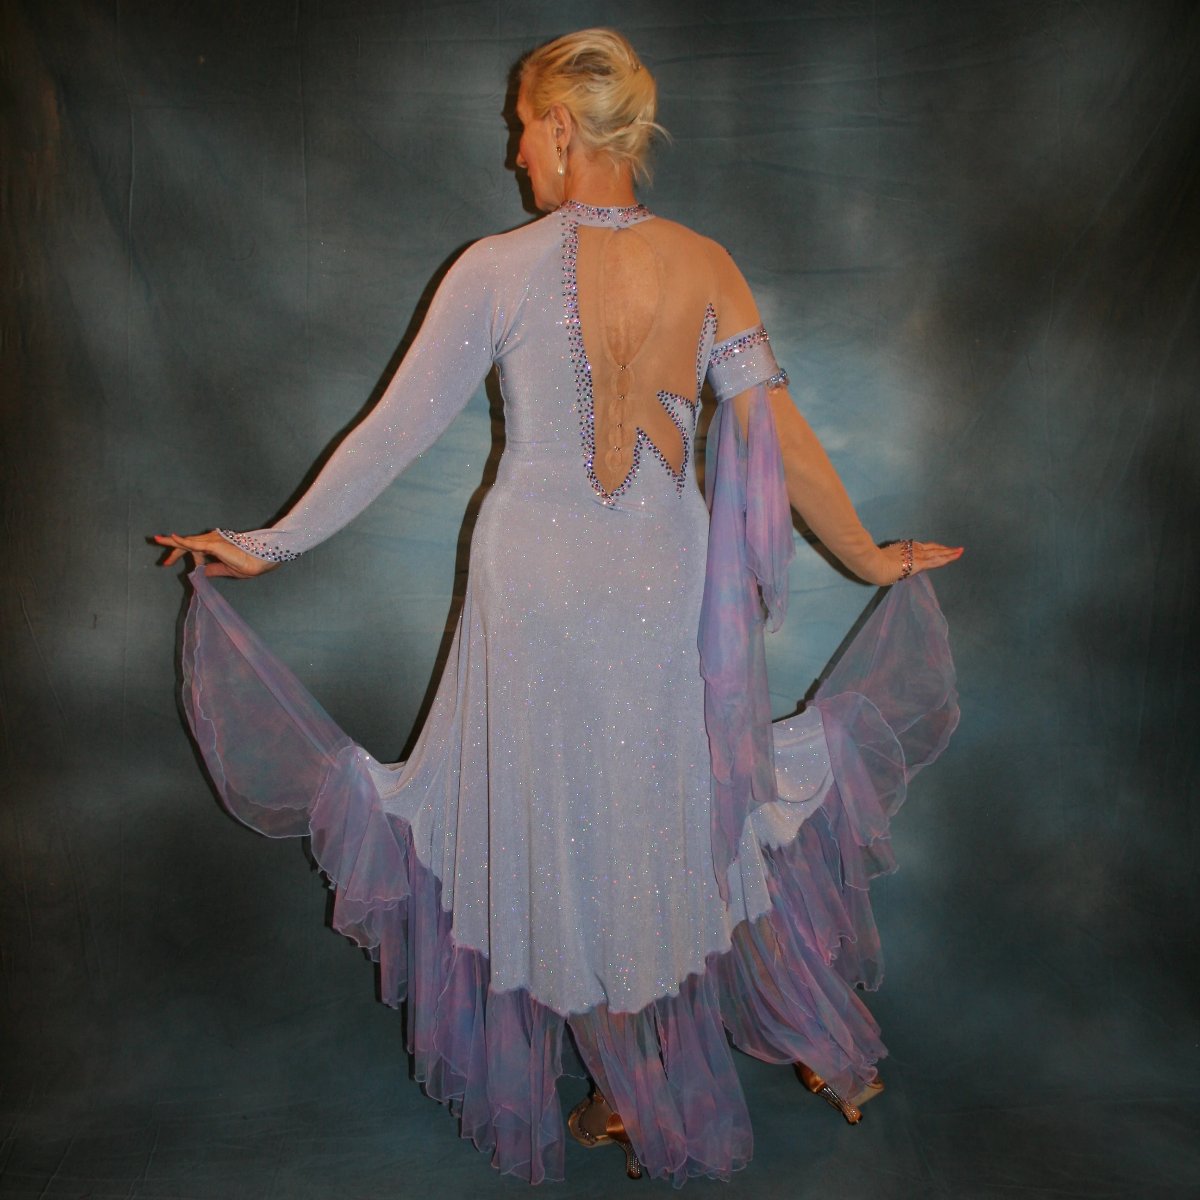 Crystal's Creations back view of Blue ballroom dress created in periwinkle blue luxurious glitter slinky on nude illusion base with tricot chiffon flounces in shades of perwinkle & soft pink